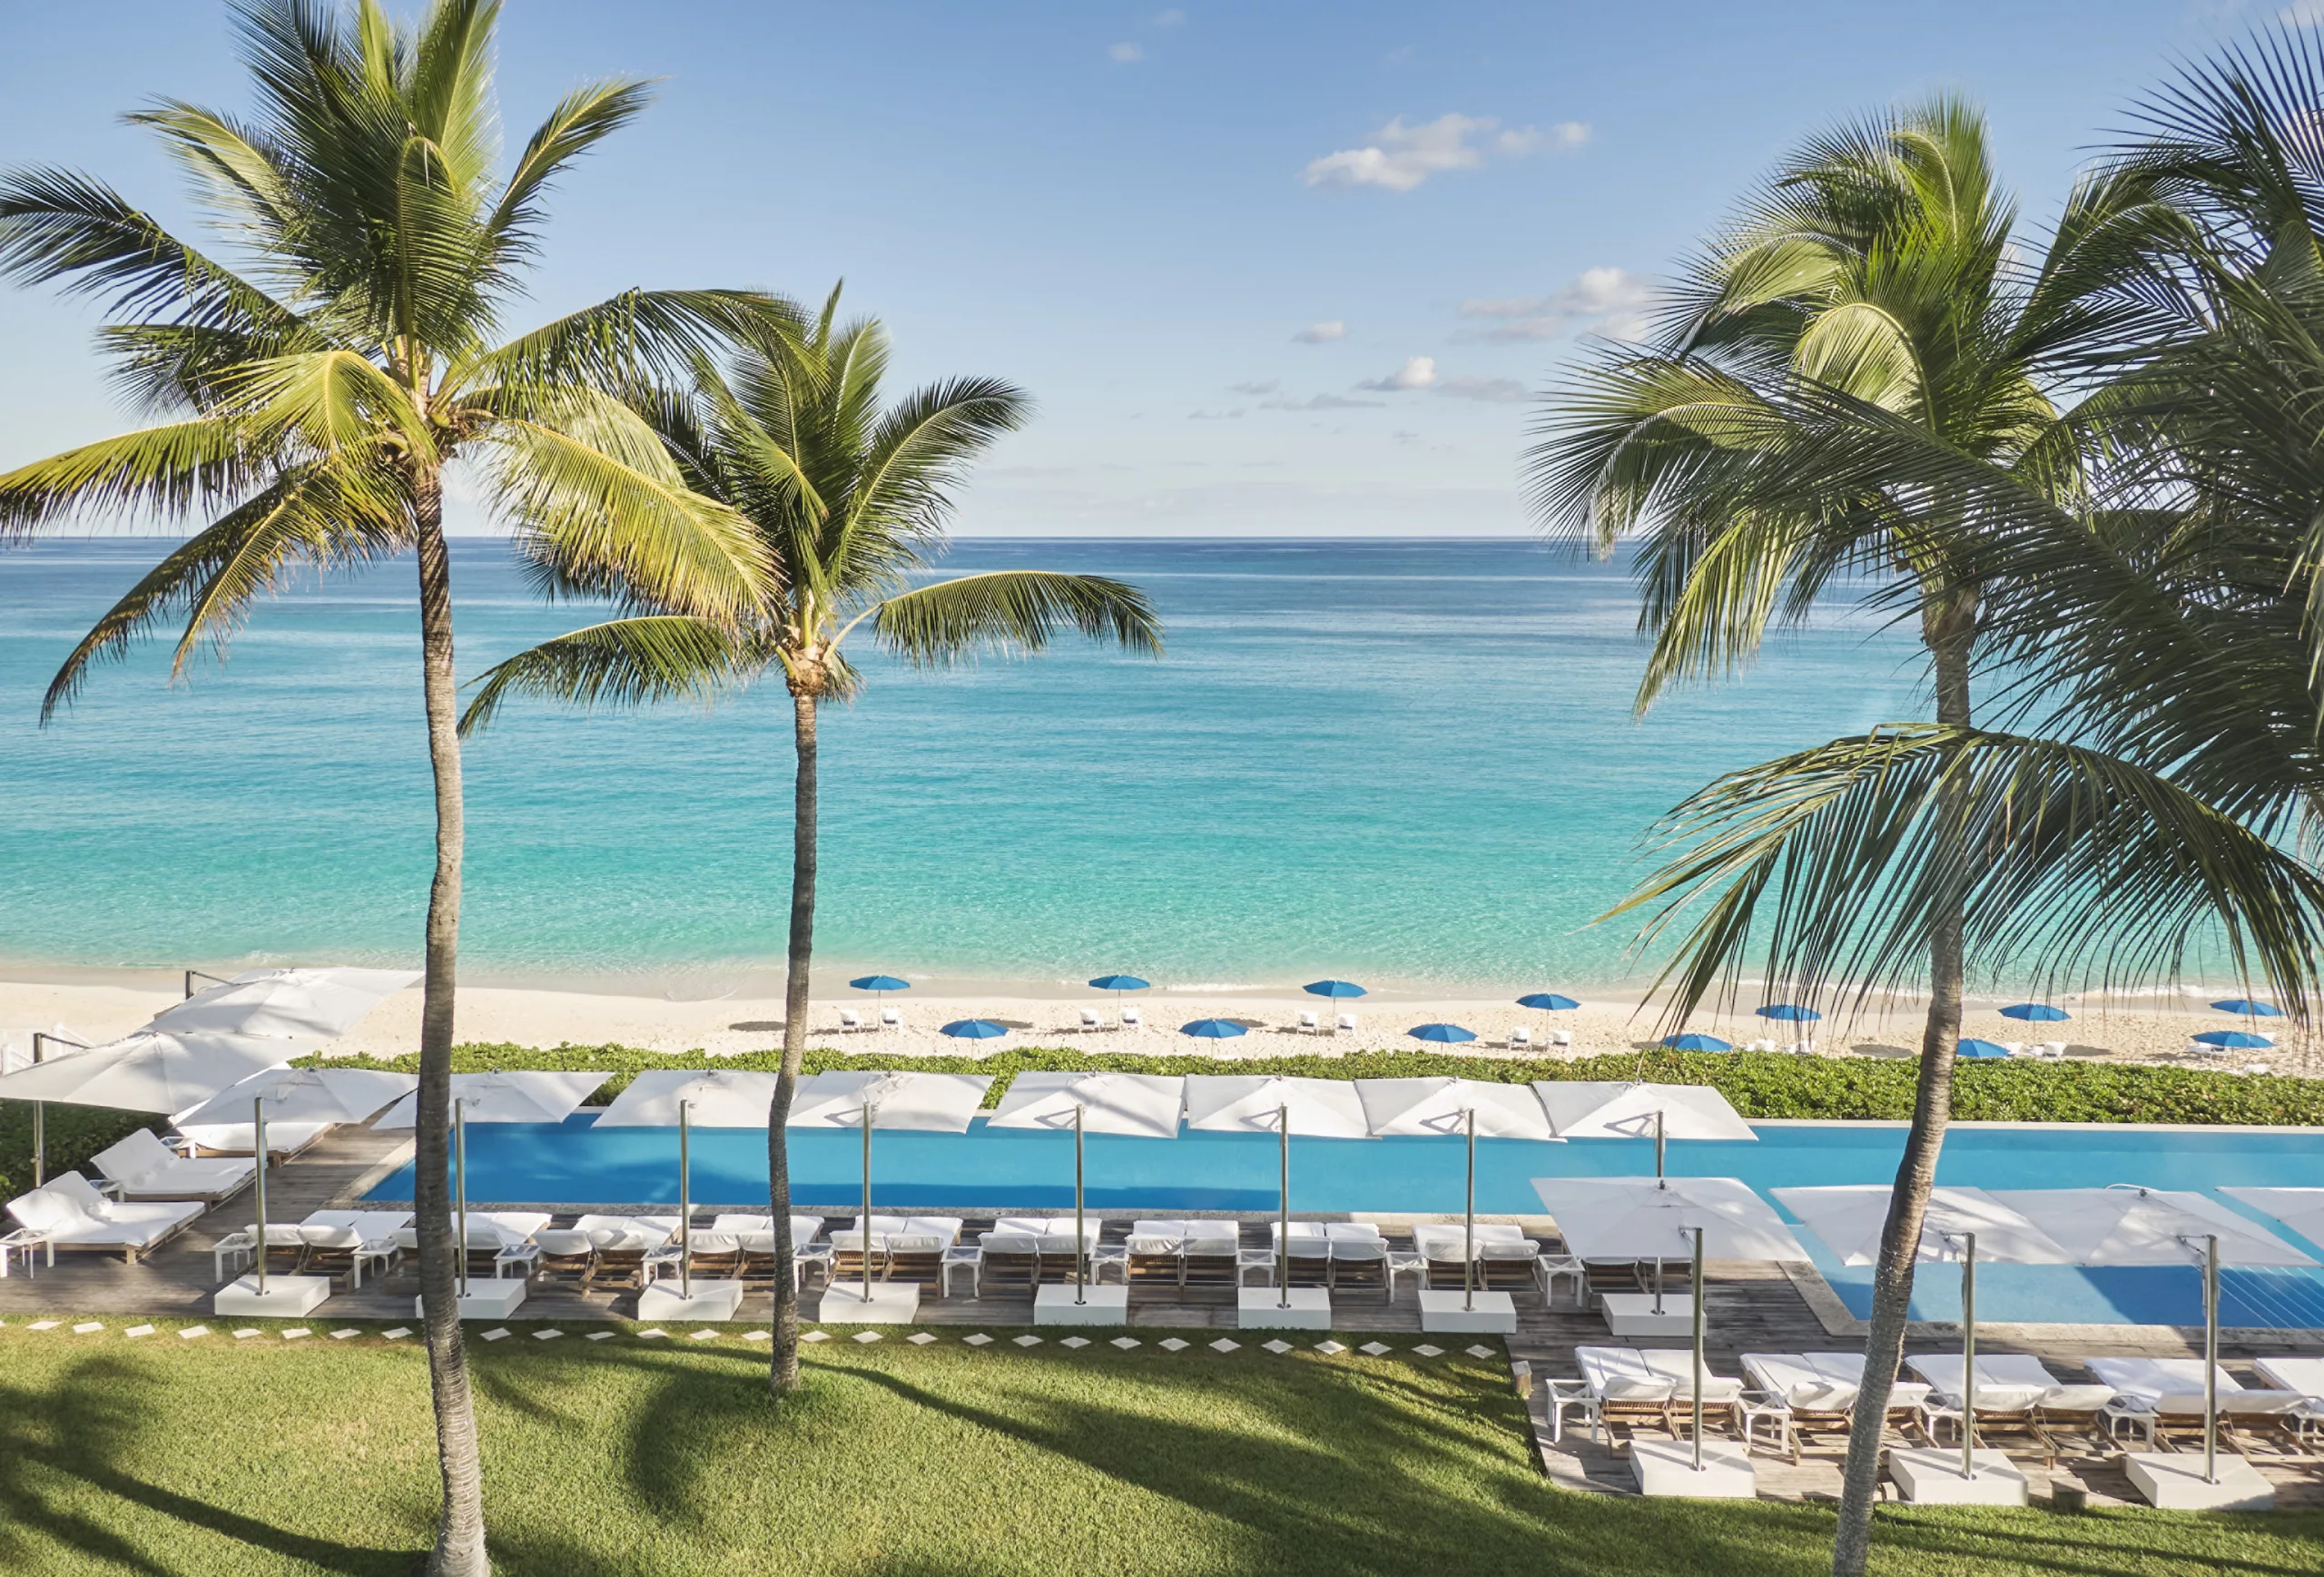 Ring in the New Year at The Ocean Club, A Four Seasons Resort, Bahamas